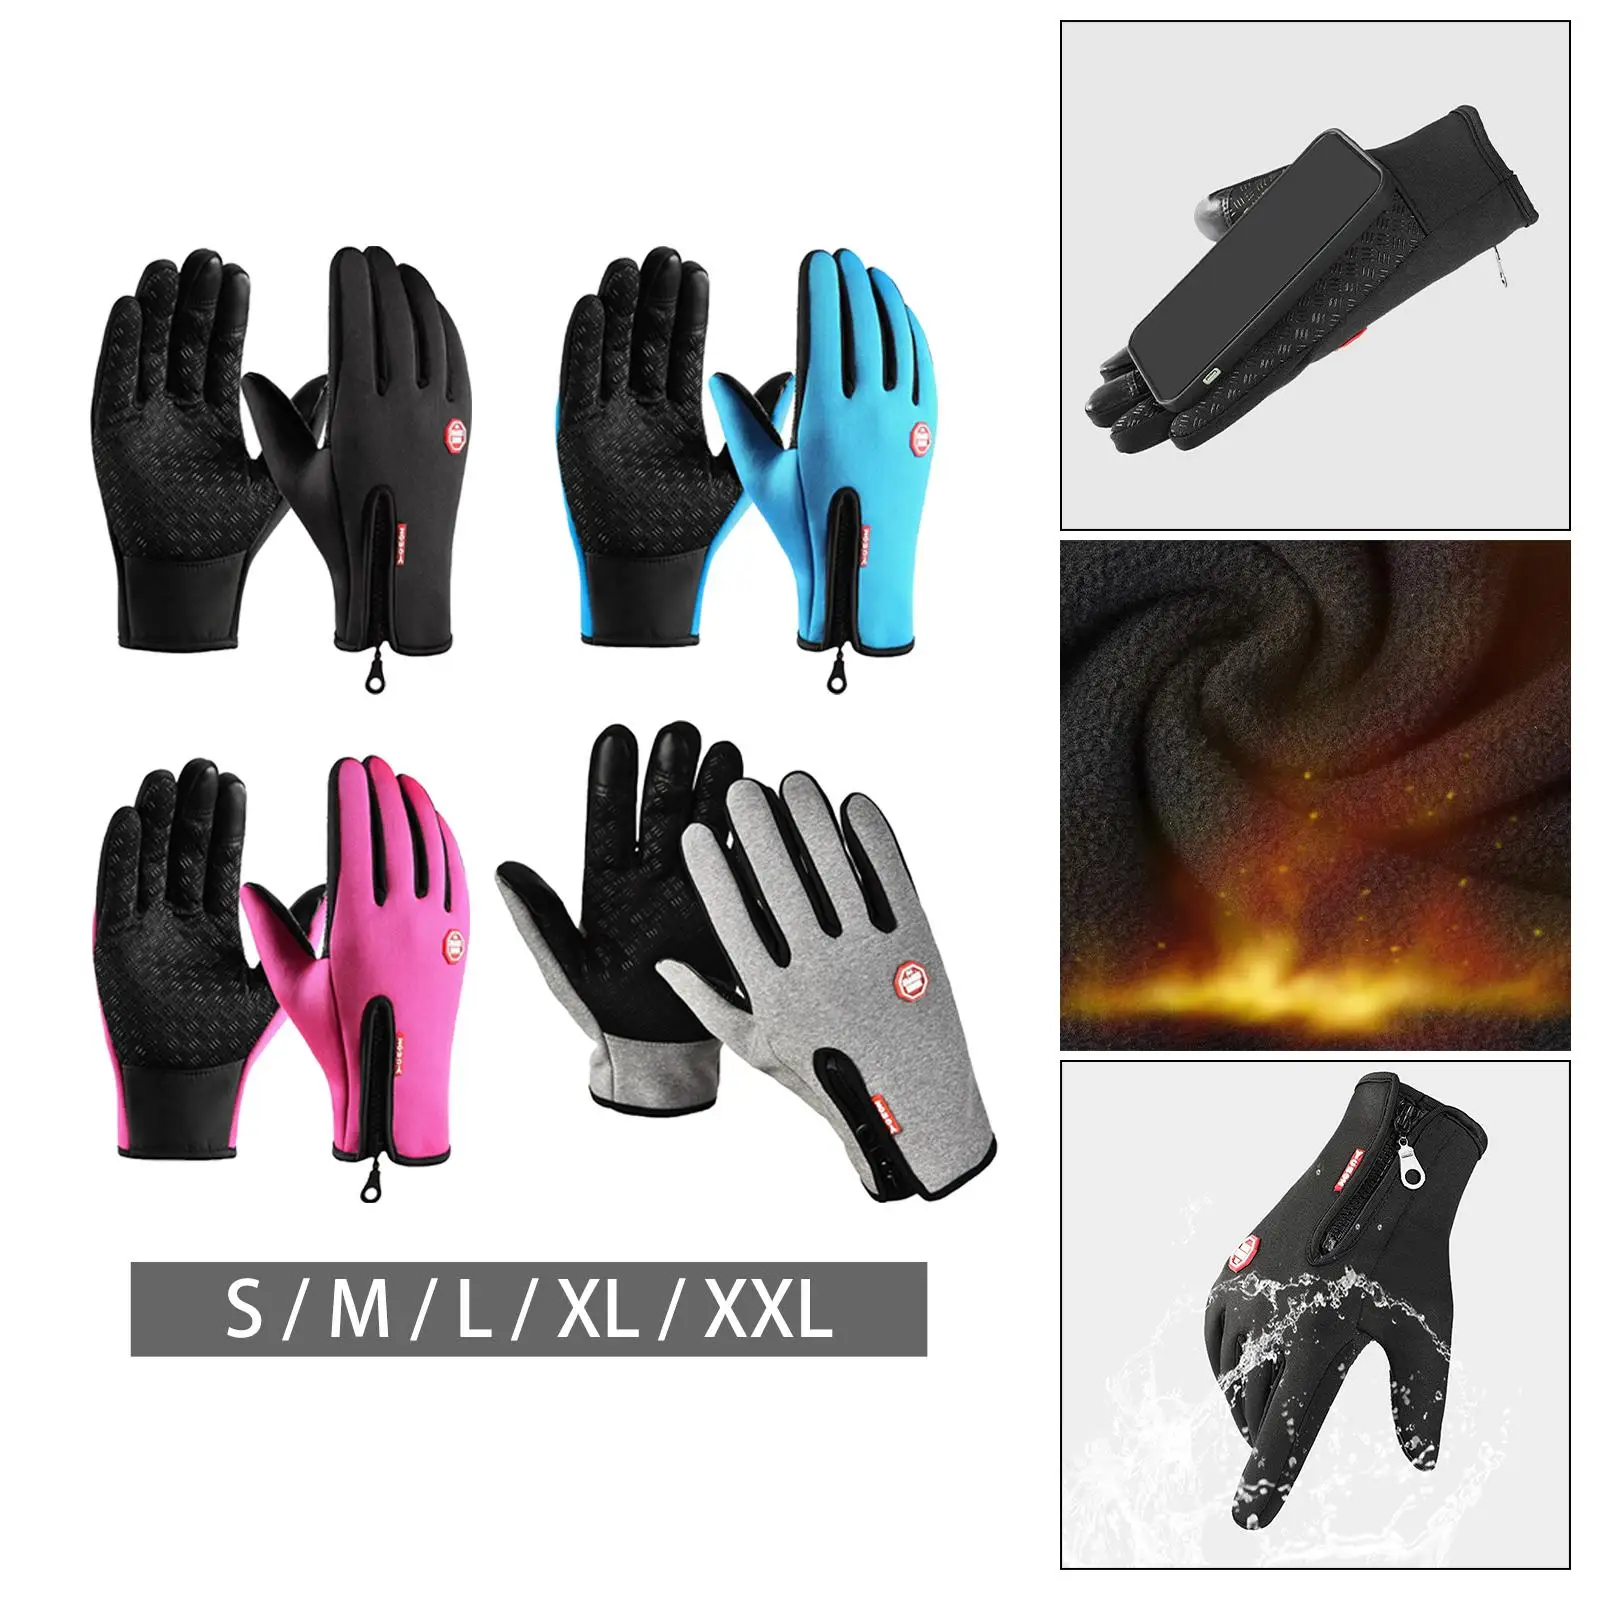 Winter Gloves Windproof Non Slip Waterproof Warm Insulated Thermal Touch Screen for Cycling Outdoor Sports Ski Men Women